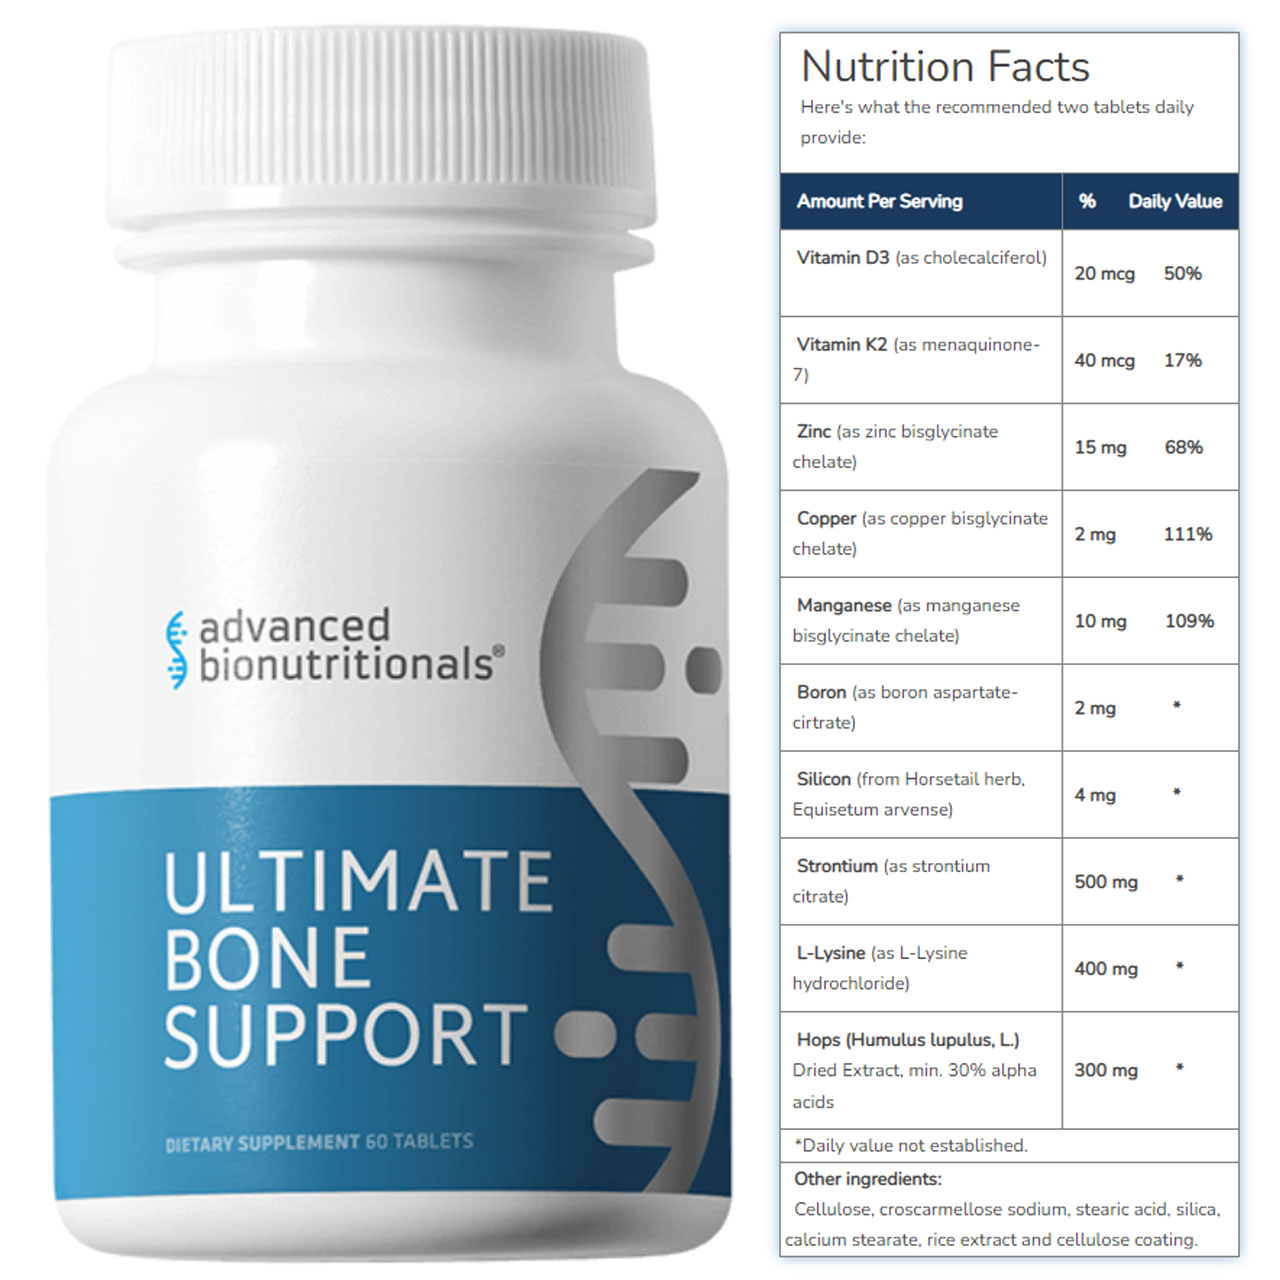 Ultimate Bone Support Supplement Facts Label